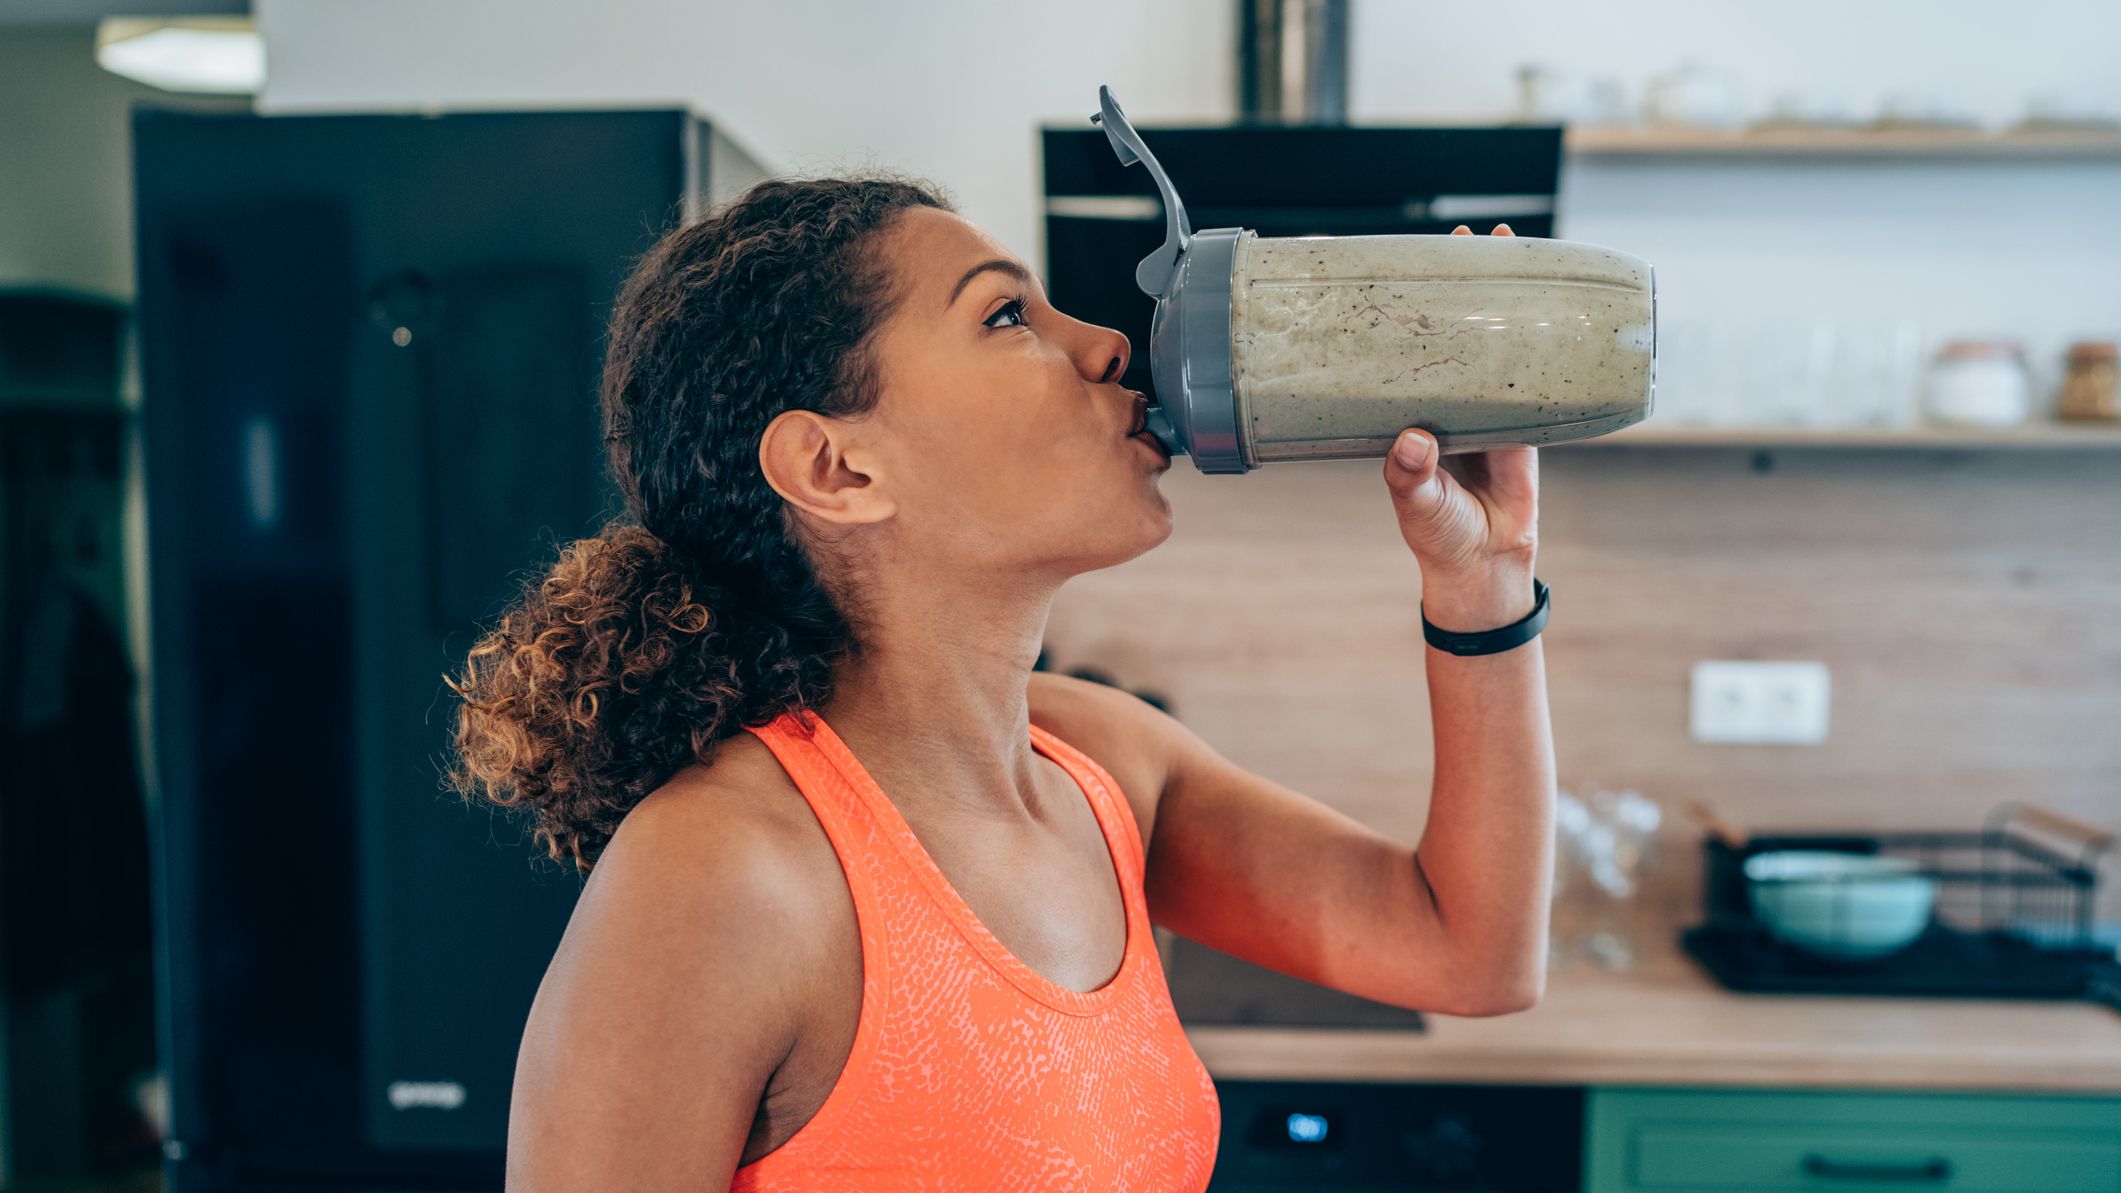 https://hips.hearstapps.com/hmg-prod/images/young-woman-drinking-protein-shake-after-workout-at-royalty-free-image-1692825072.jpg?crop=1xw:0.84375xh;center,top